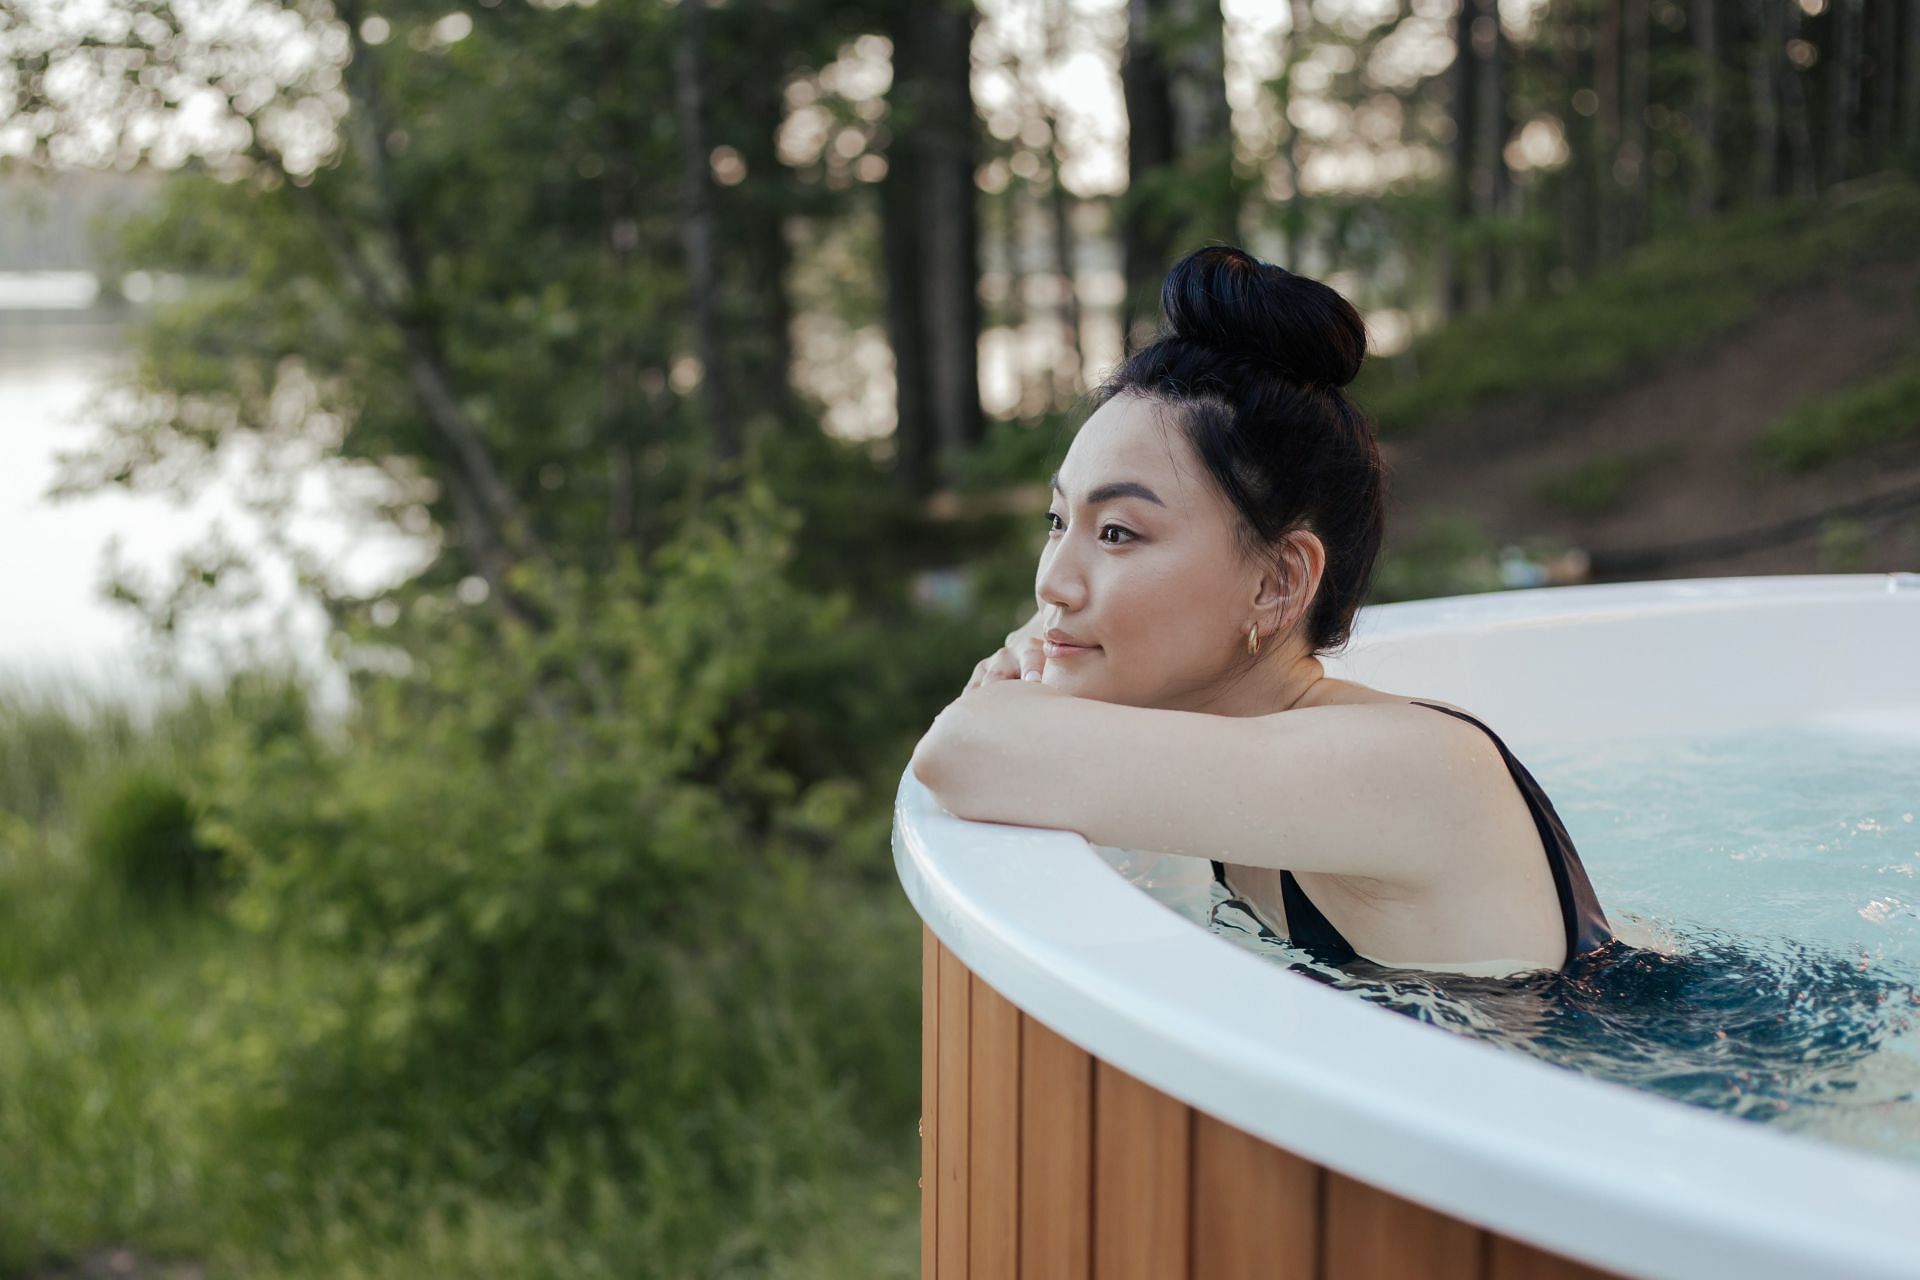 Hot tub health benefits (image sourced via Pexels / Photo by ron lach)